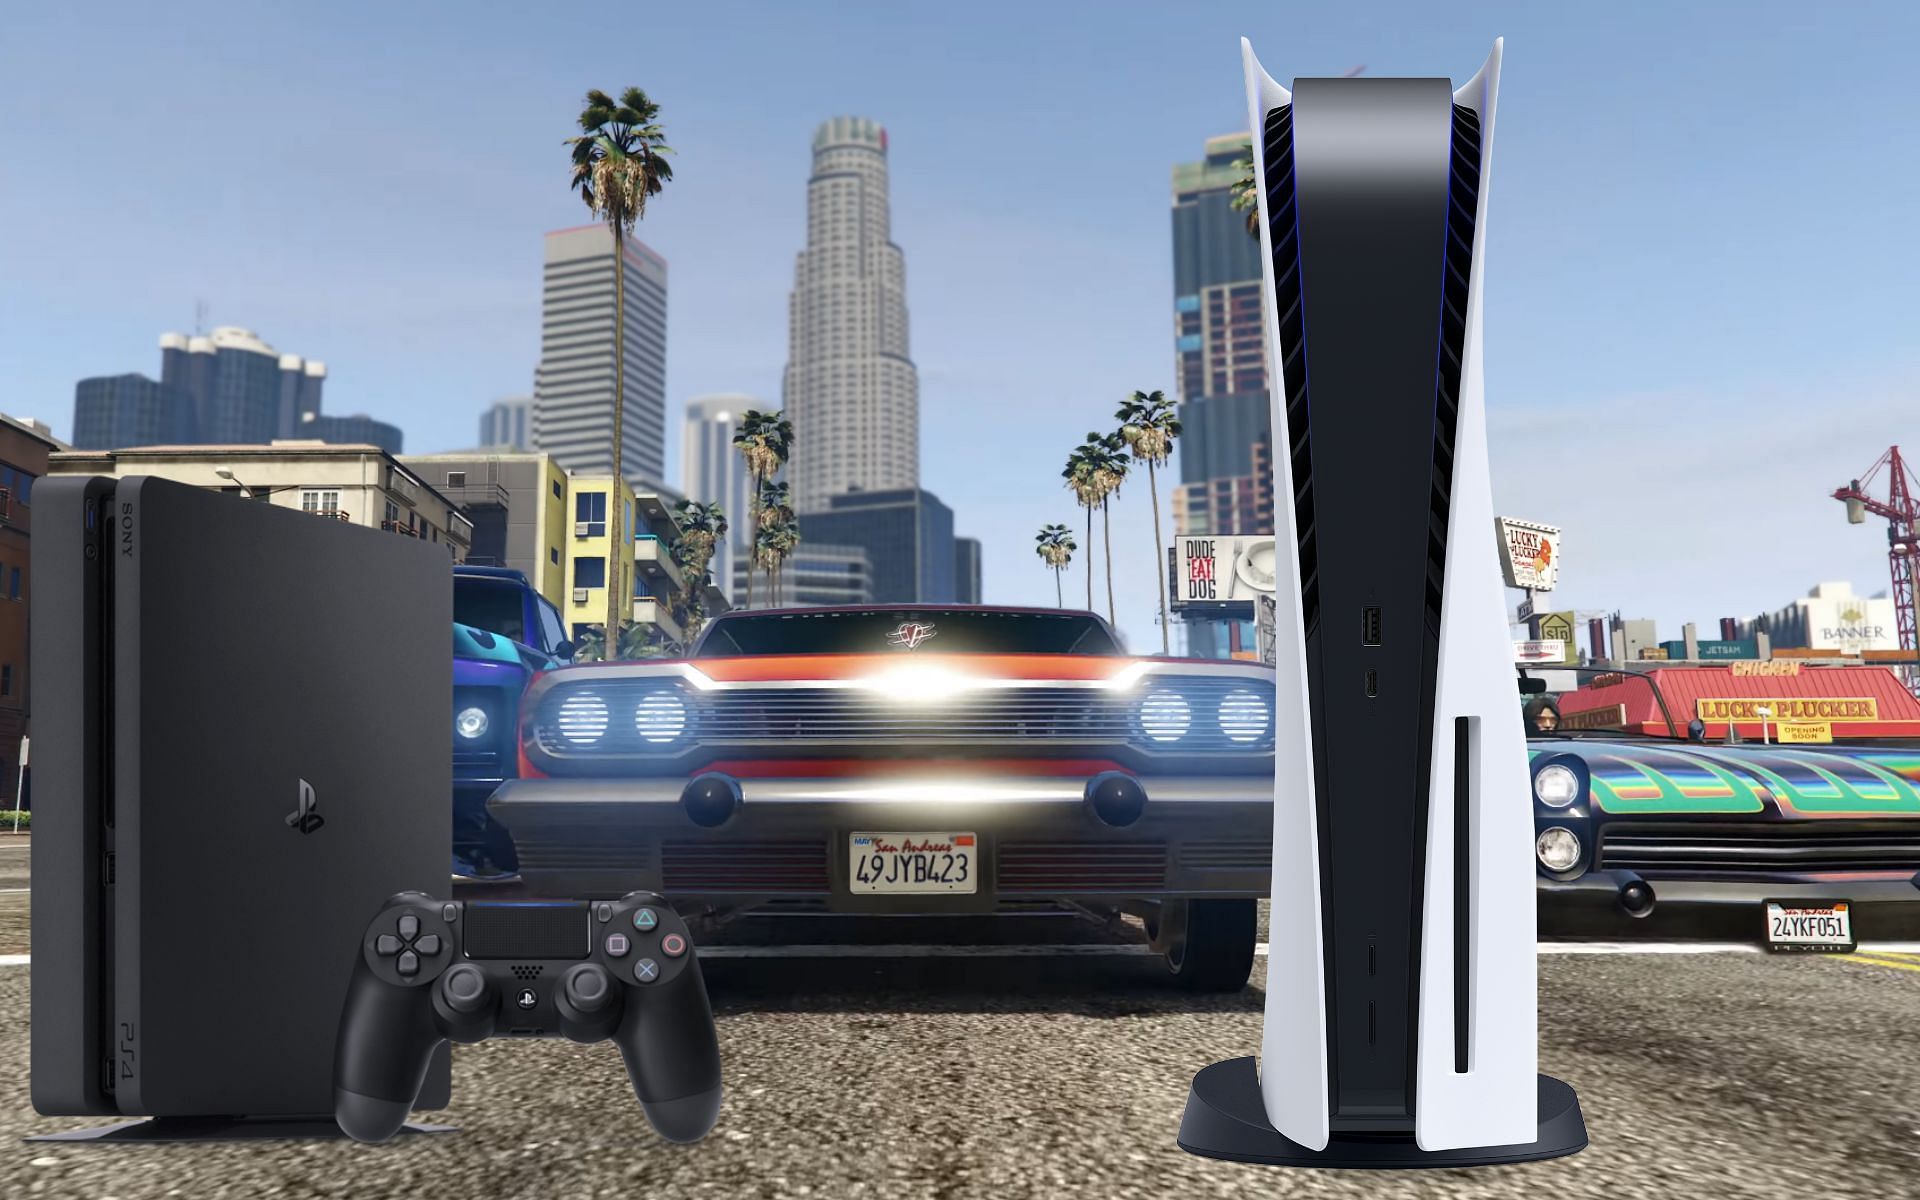 Why adding crossplay to GTA 5 Online will result in a massive